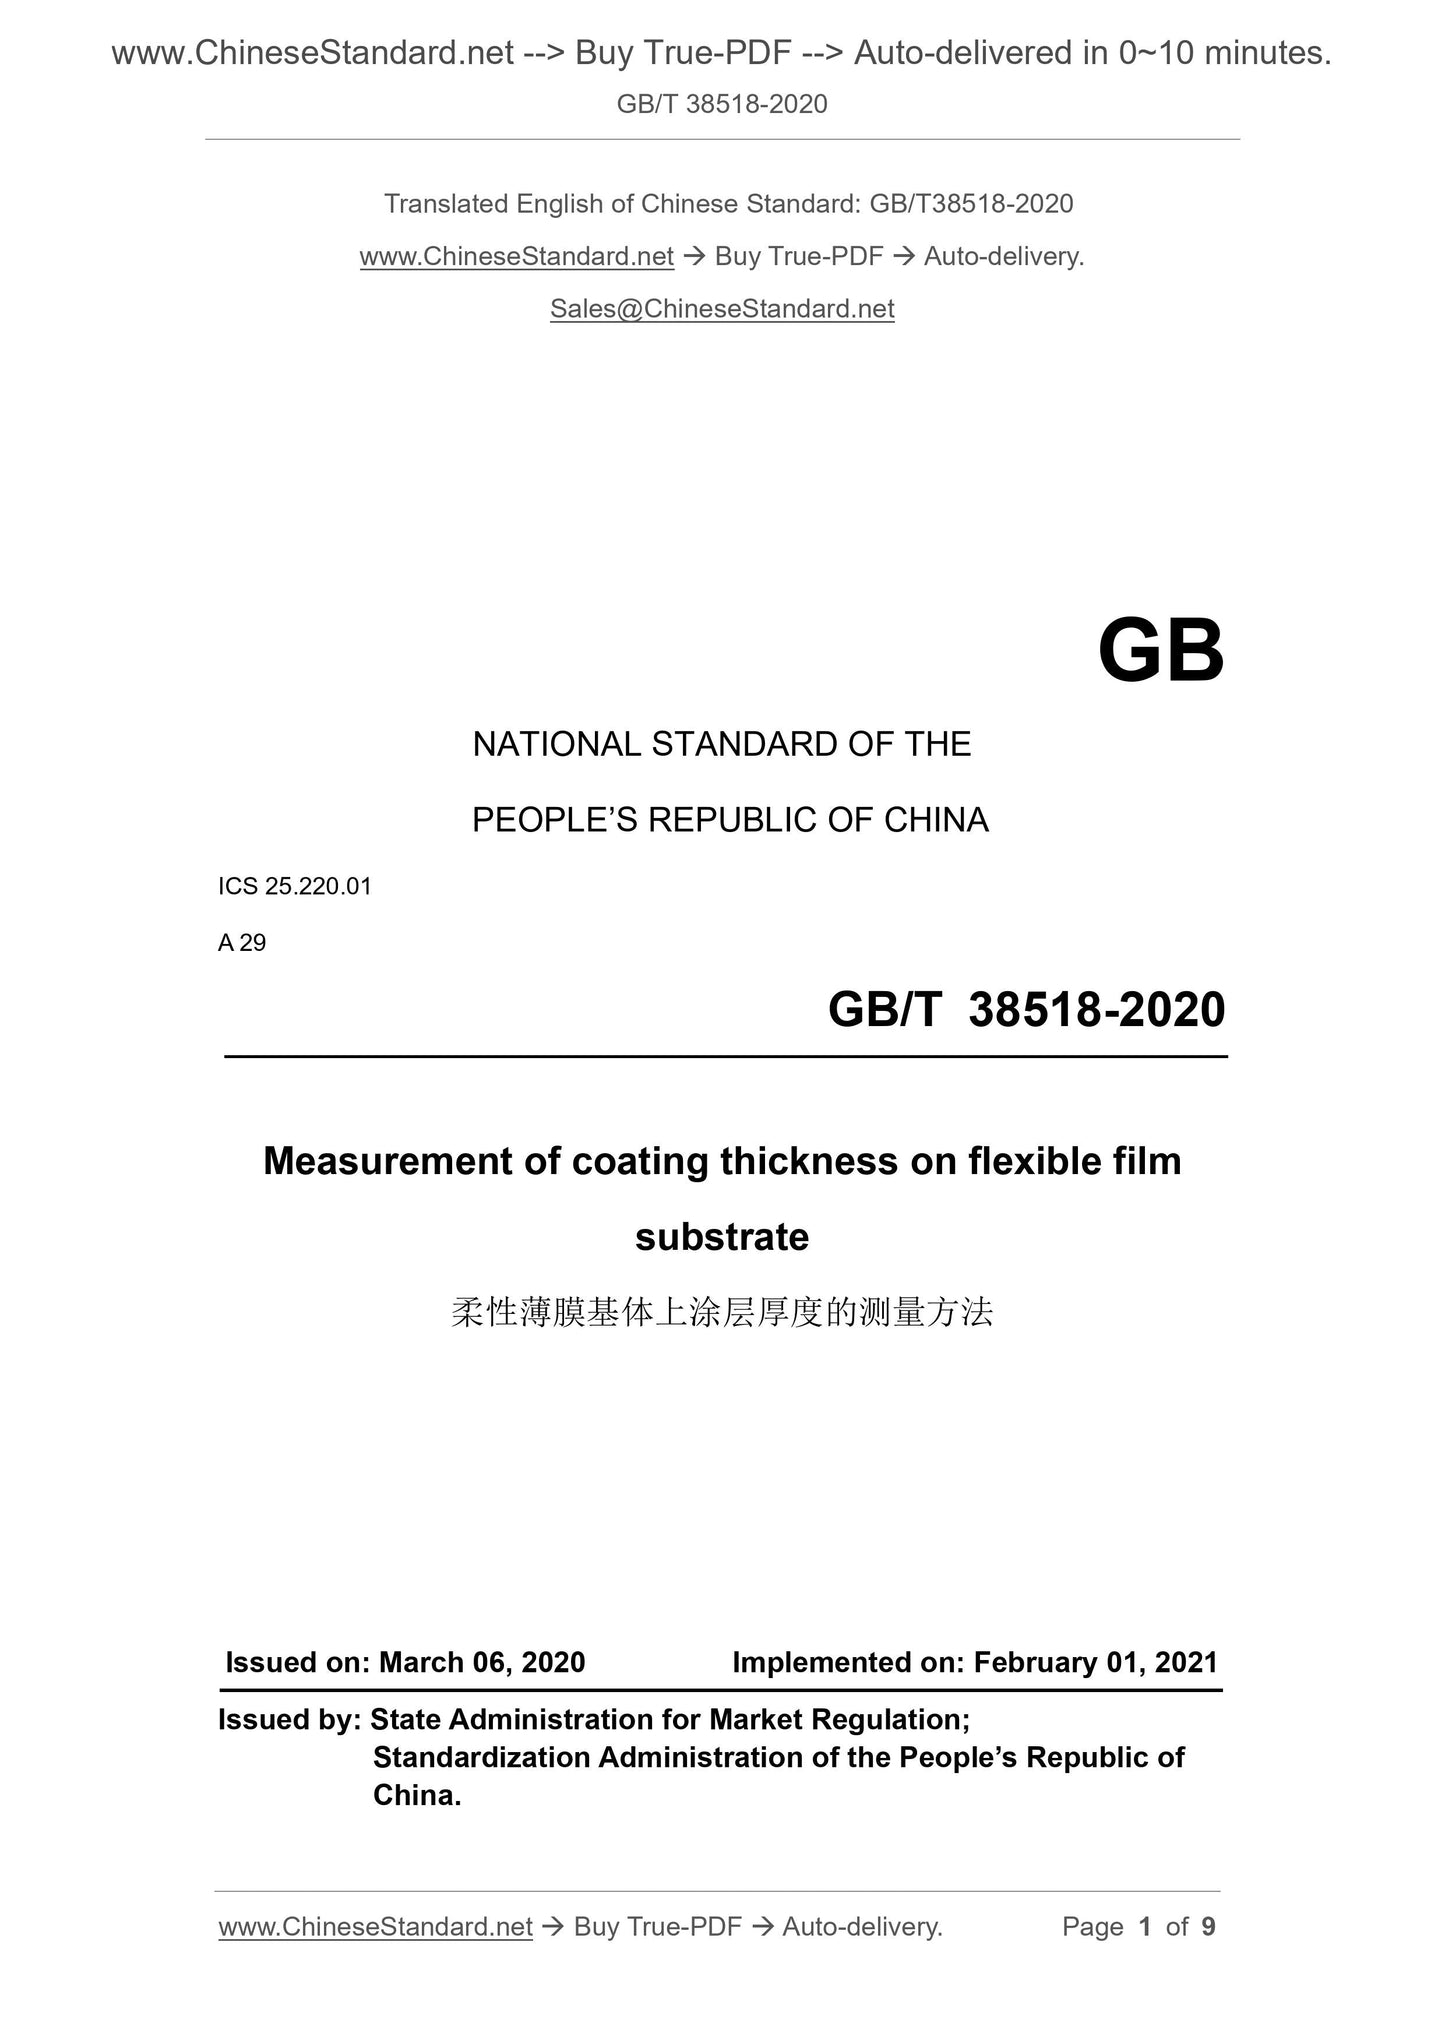 GB/T 38518-2020 Page 1